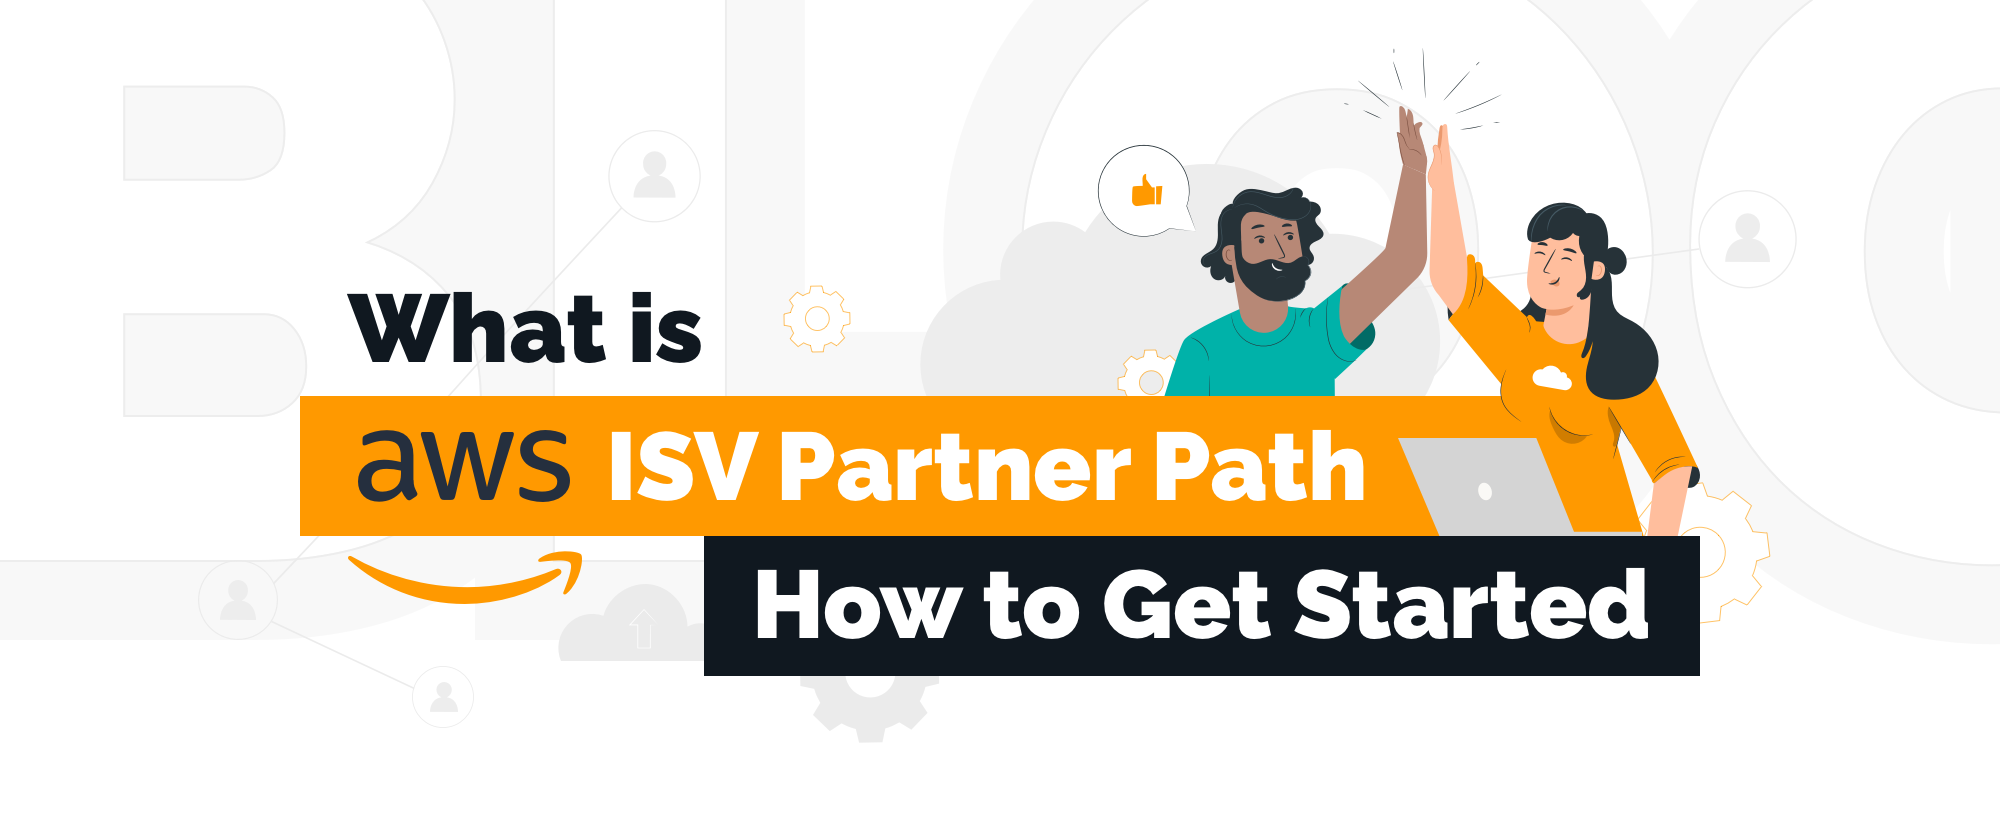 What is AWS ISV Partner Path and How to Get Started